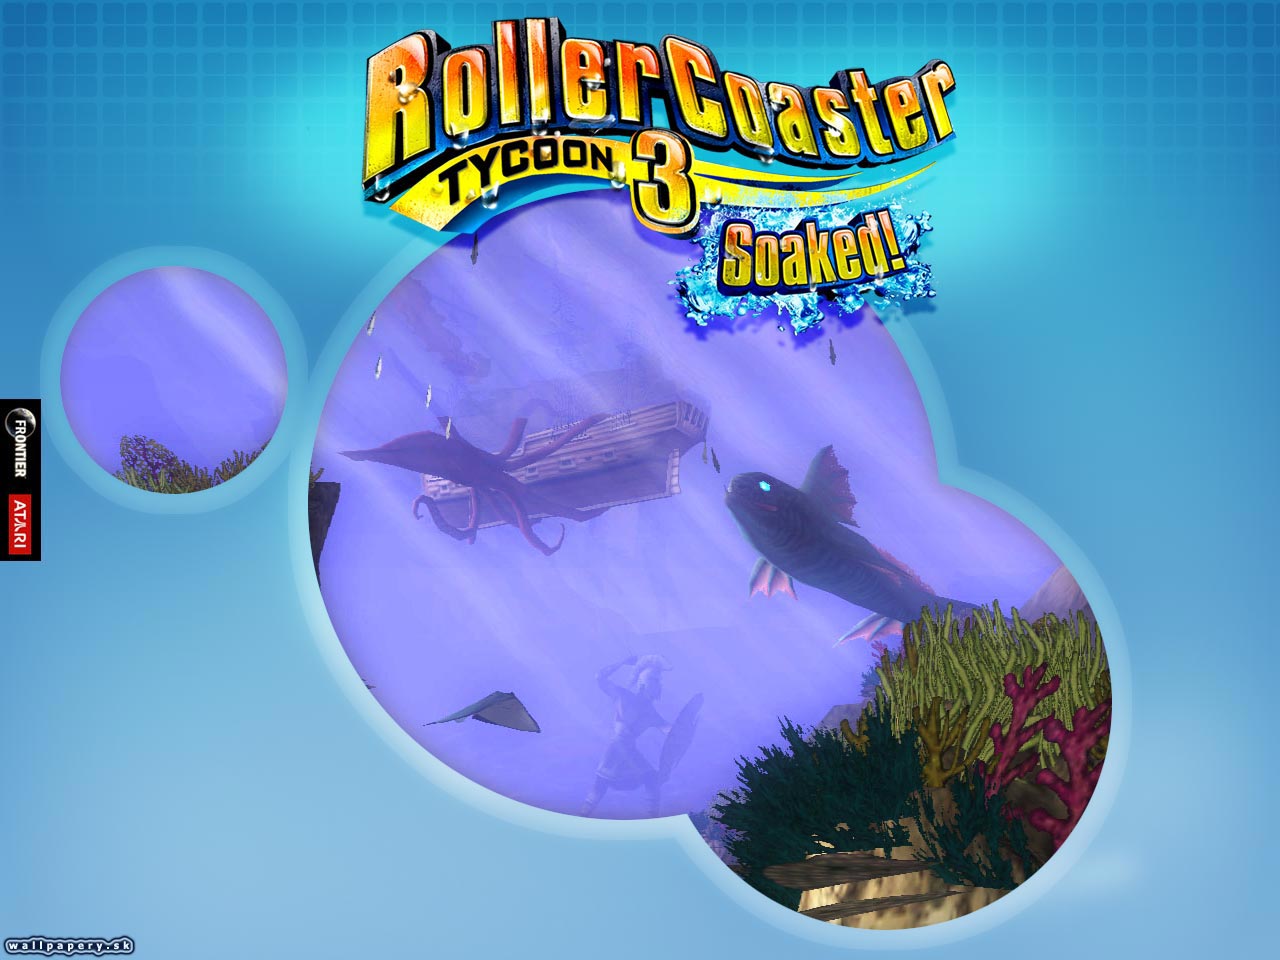 RollerCoaster Tycoon 3: Soaked! - wallpaper 5